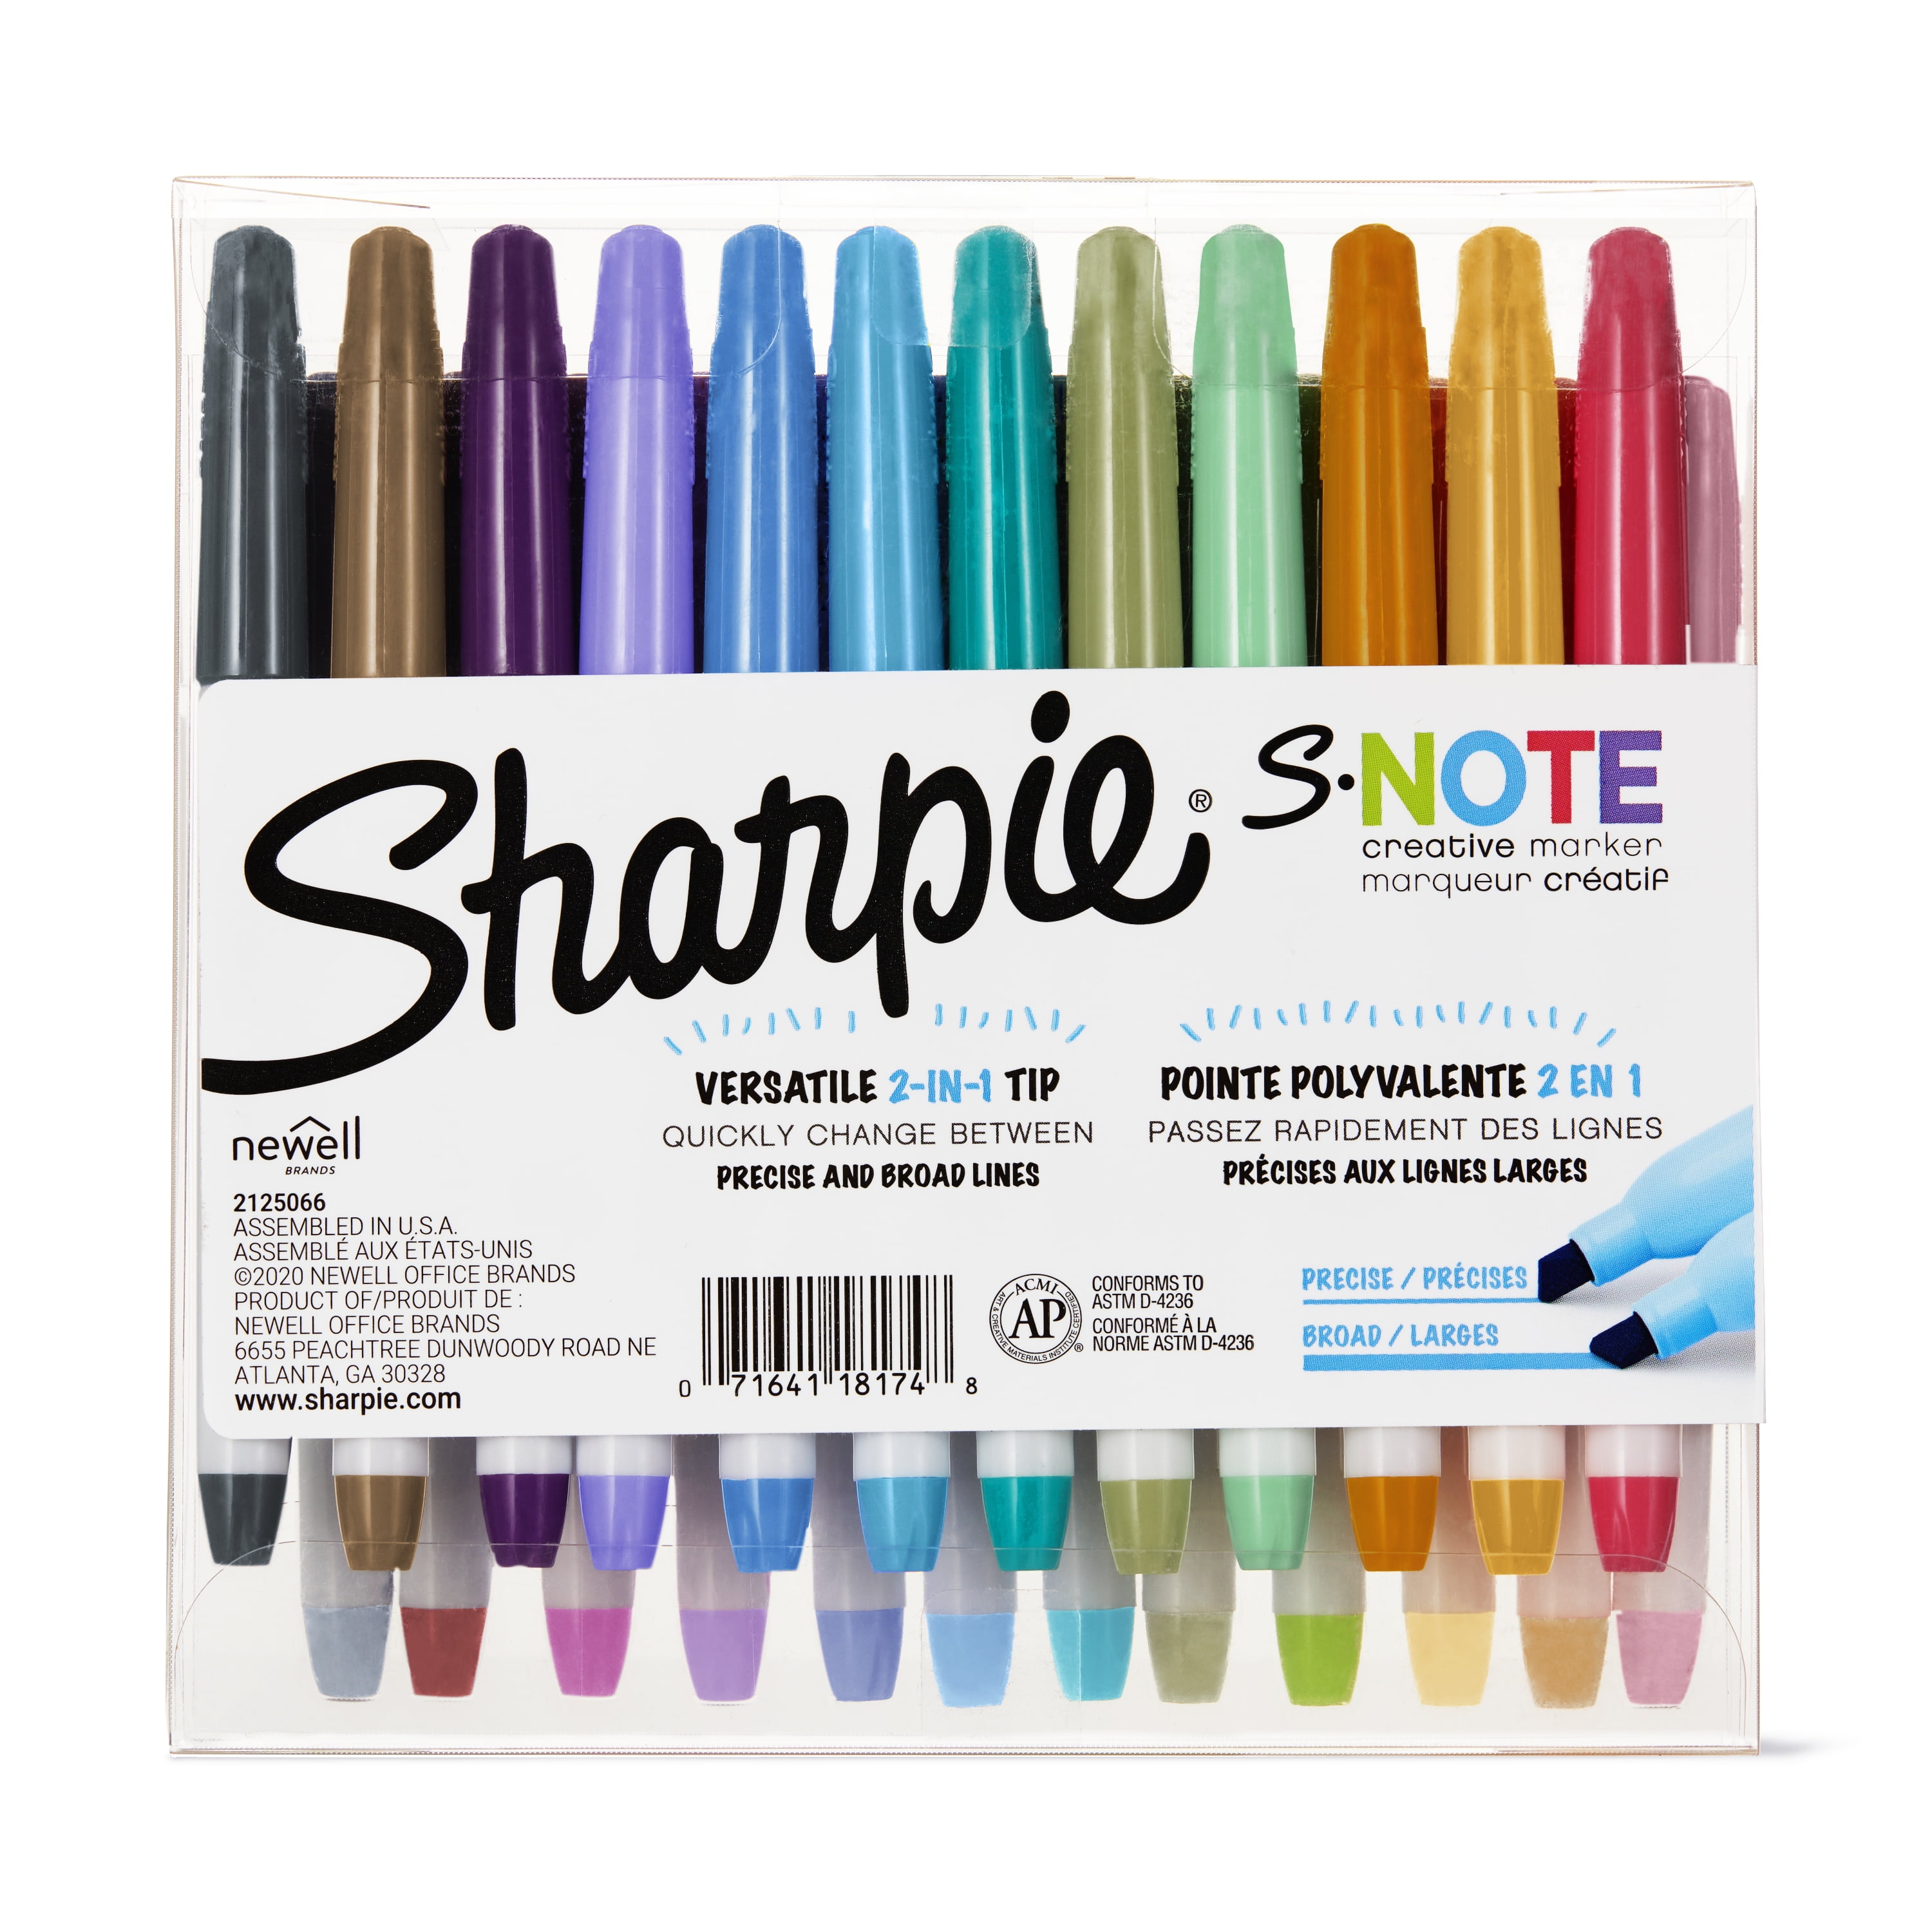 Found these s note sharpies and they're basically like the zebra